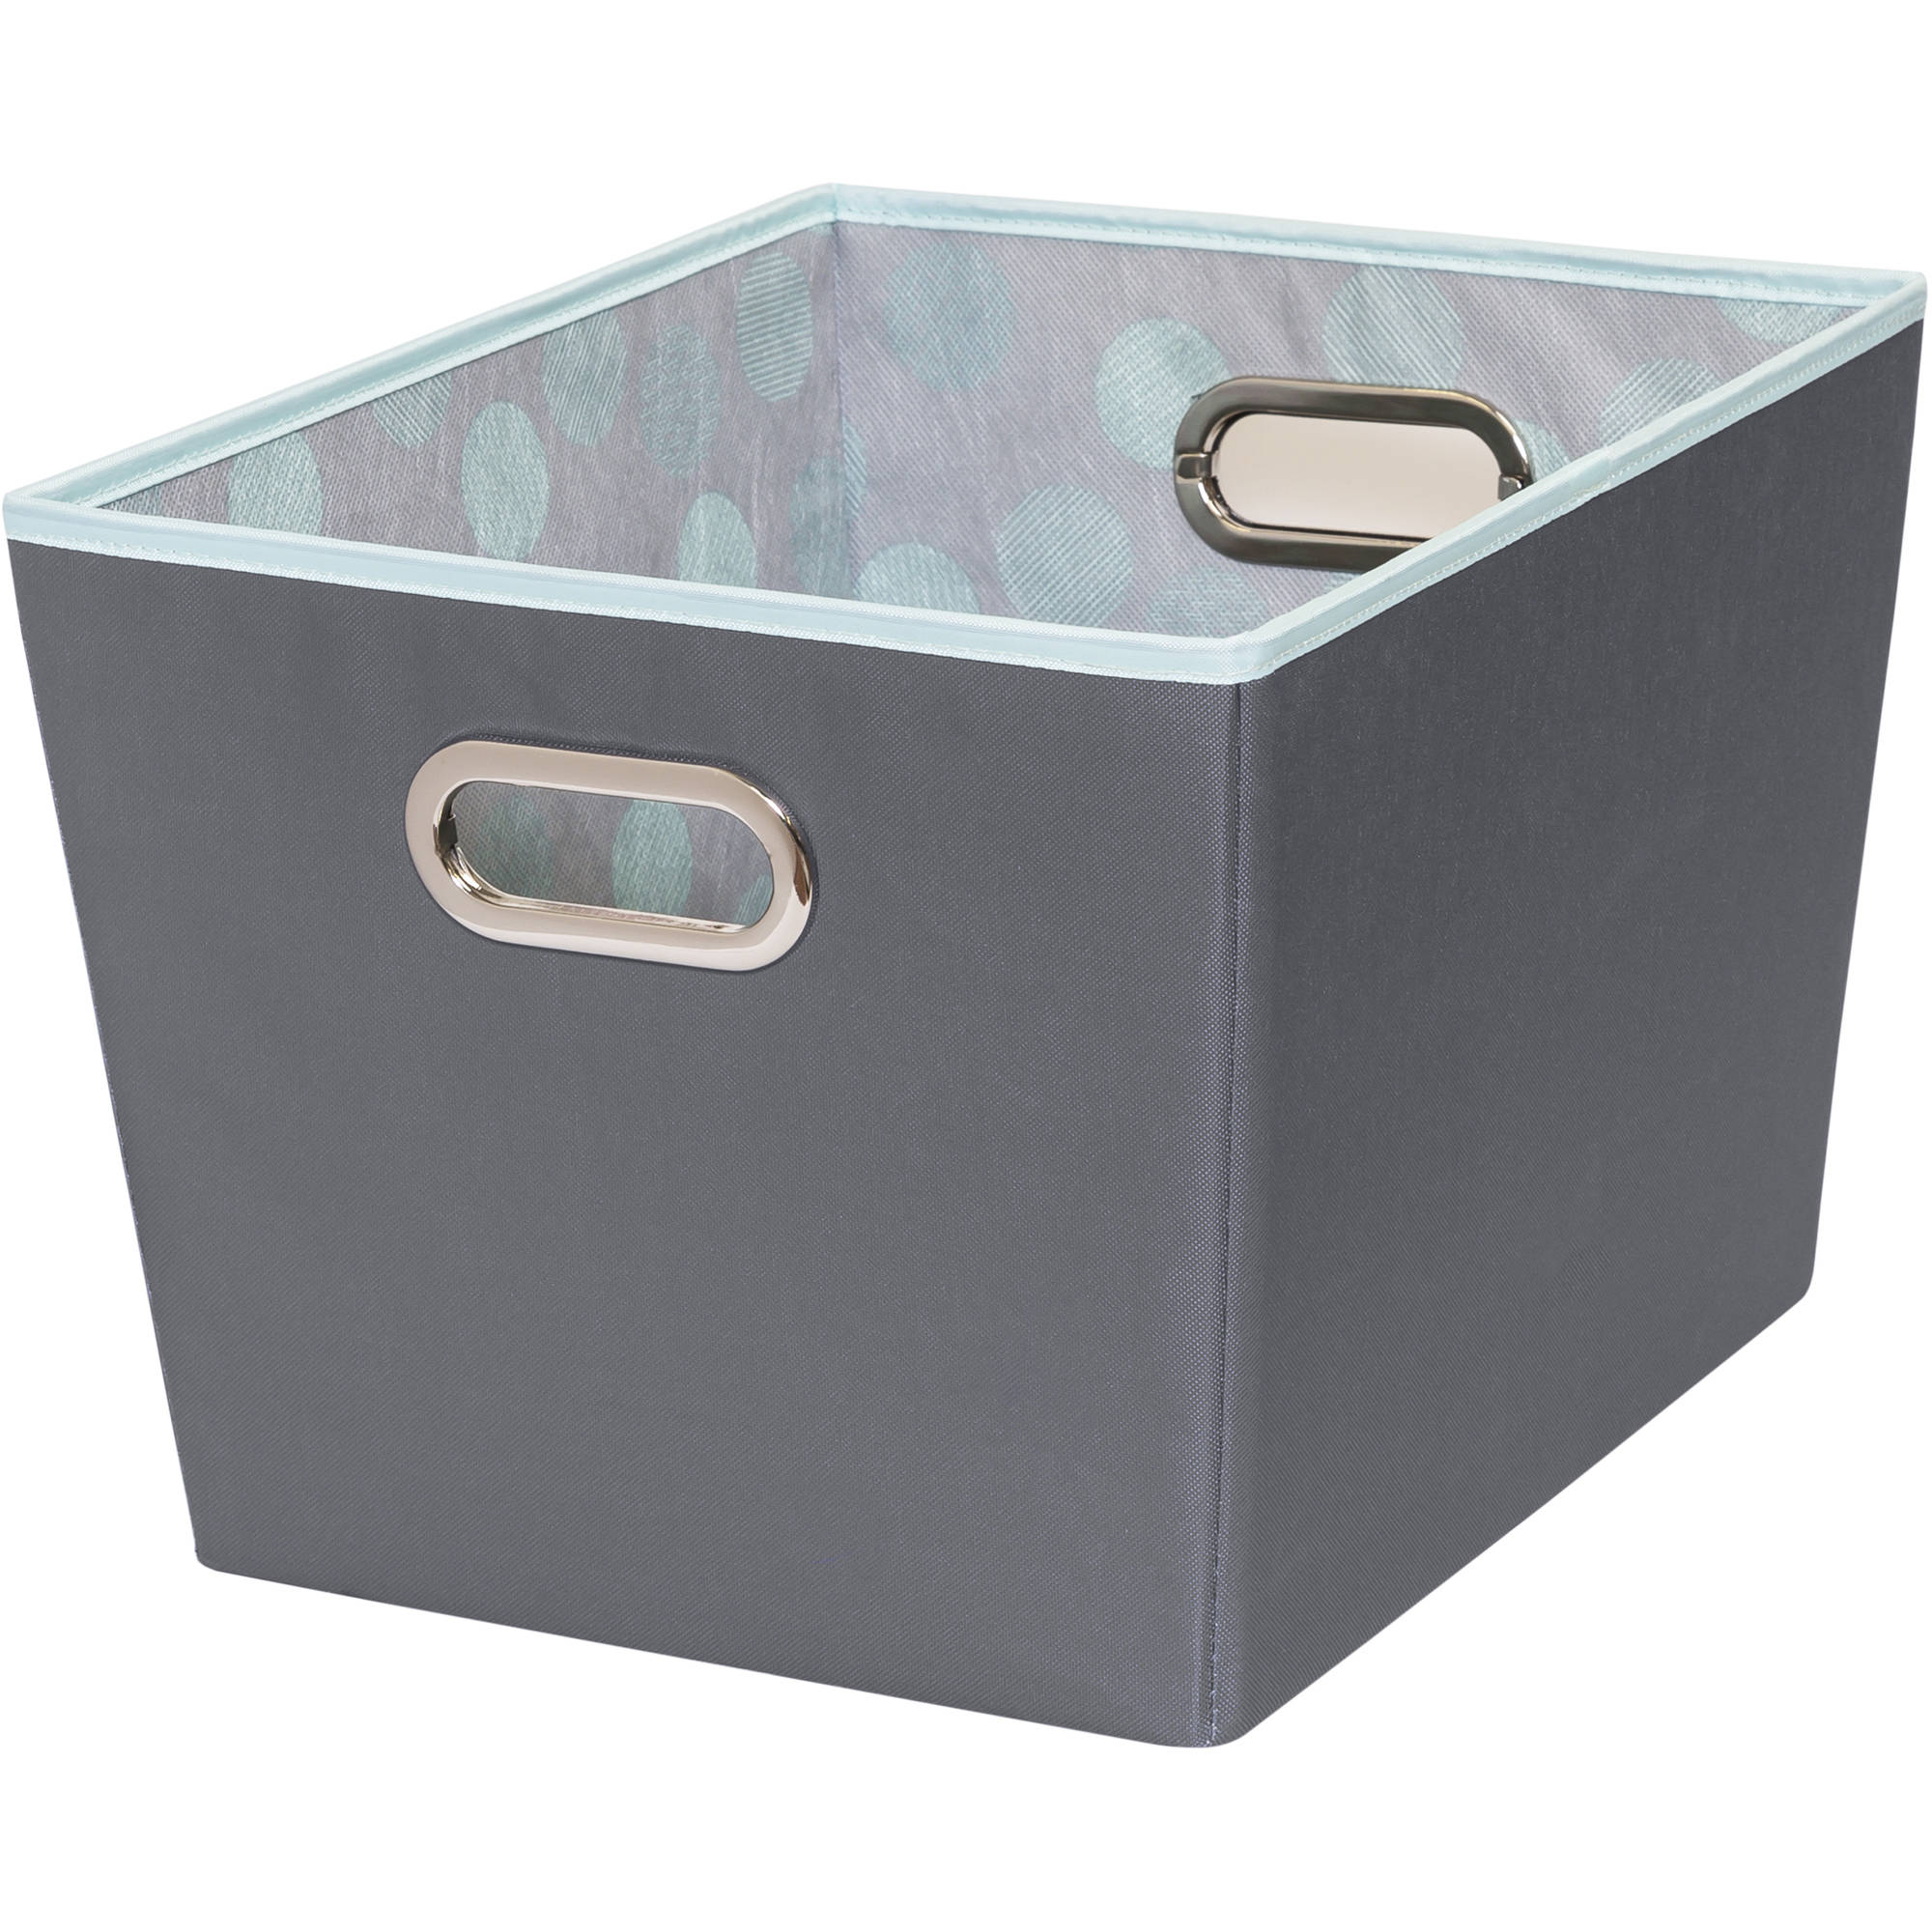 Honey Can Do Medium Storage Bins with Handles, Mint (Pack of 2) - image 1 of 4